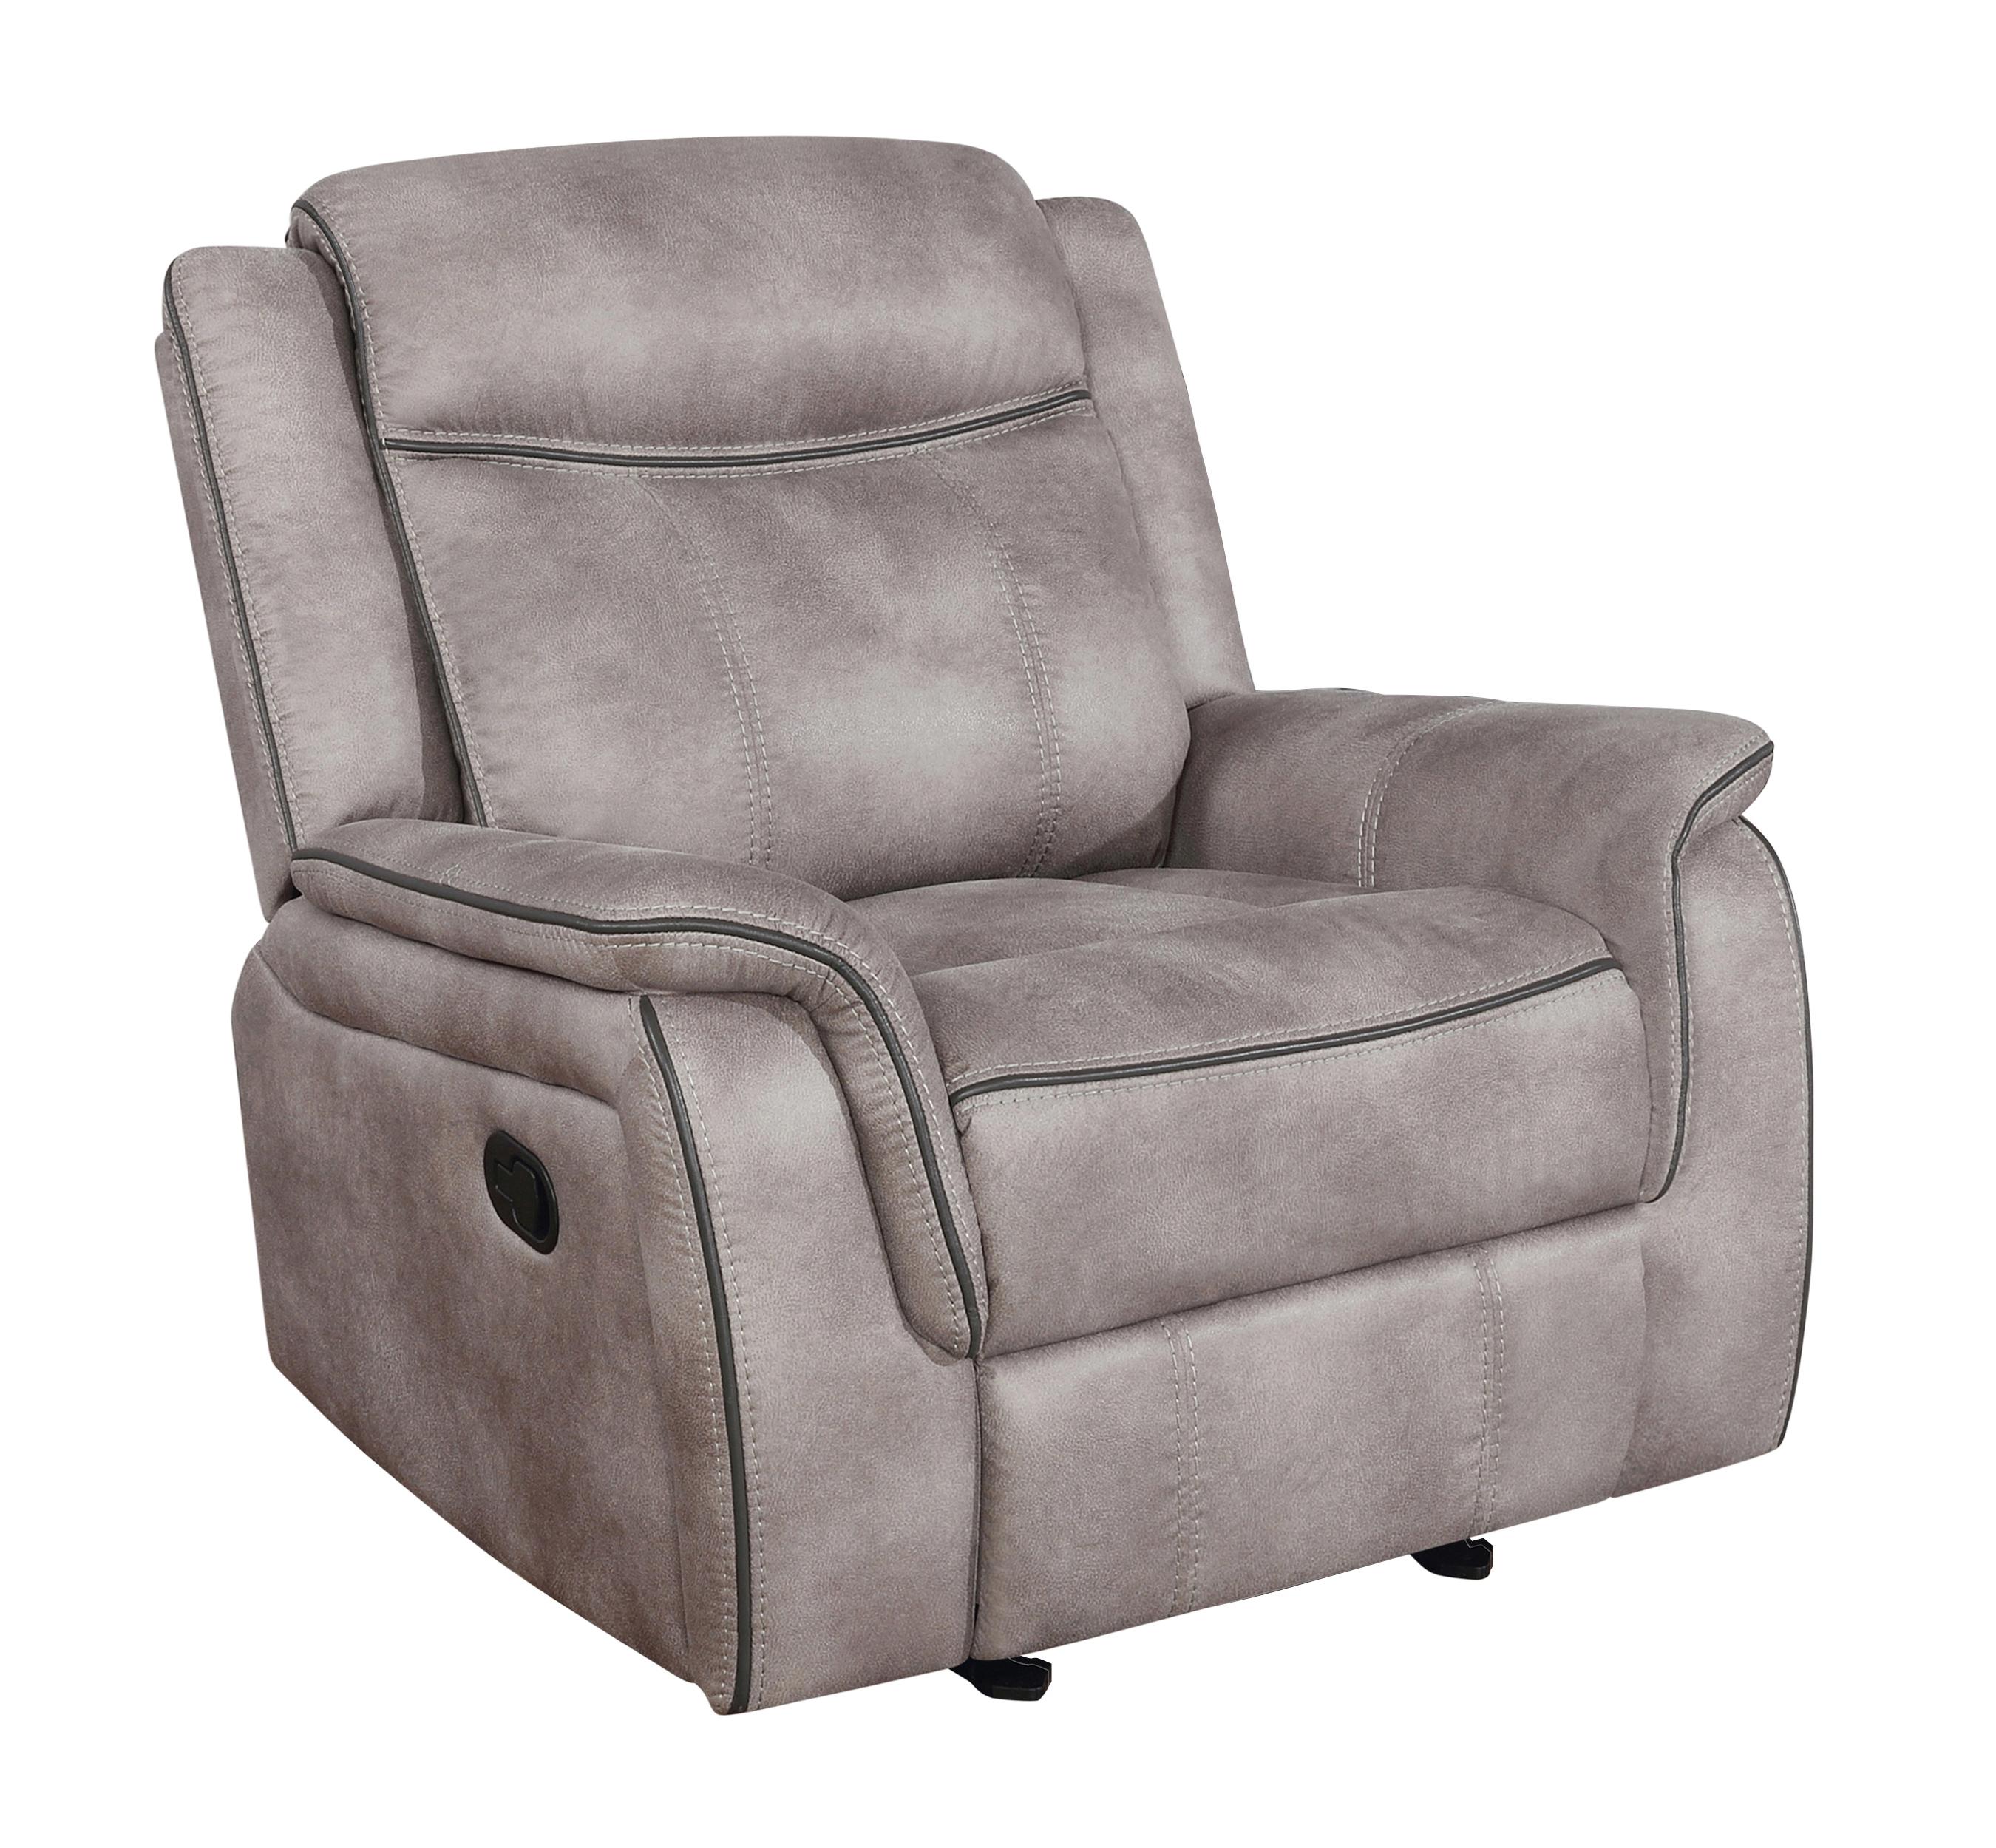 Transitional Glider recliner 603503 Lawrence 603503 in Taupe 